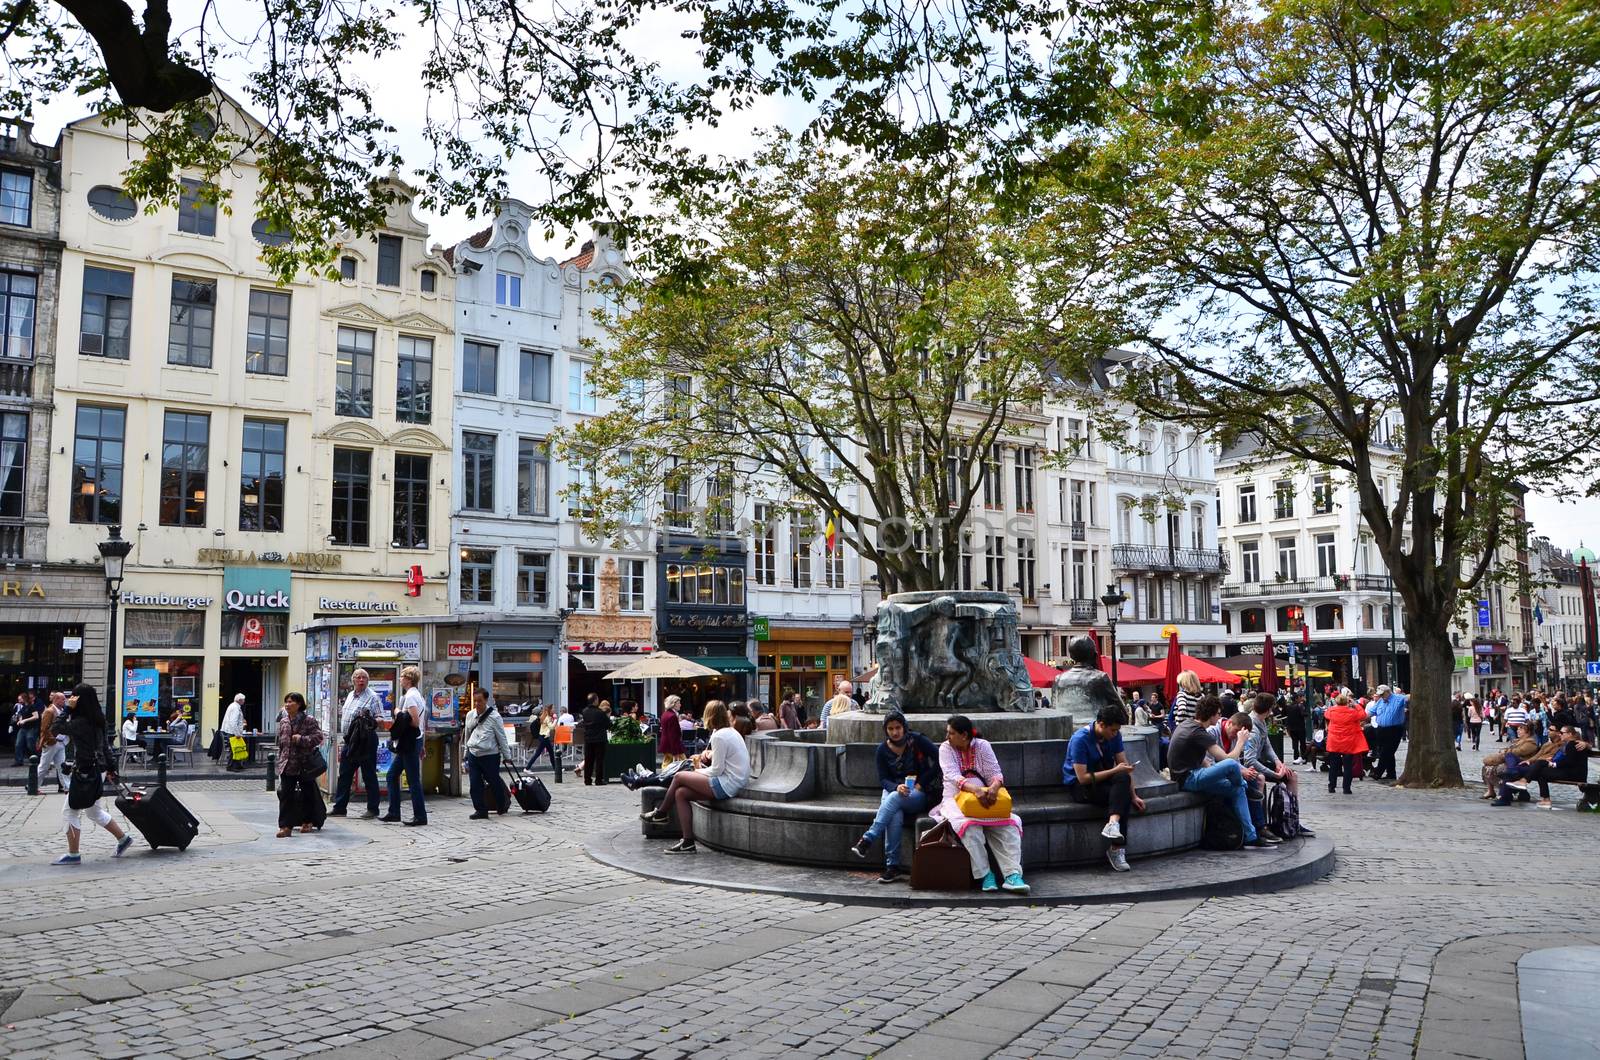 Brussels, Belgium - May 12, 2015: People at Place d'Espagne (Spanish Sqaure) in Brussels, Belgium. by siraanamwong